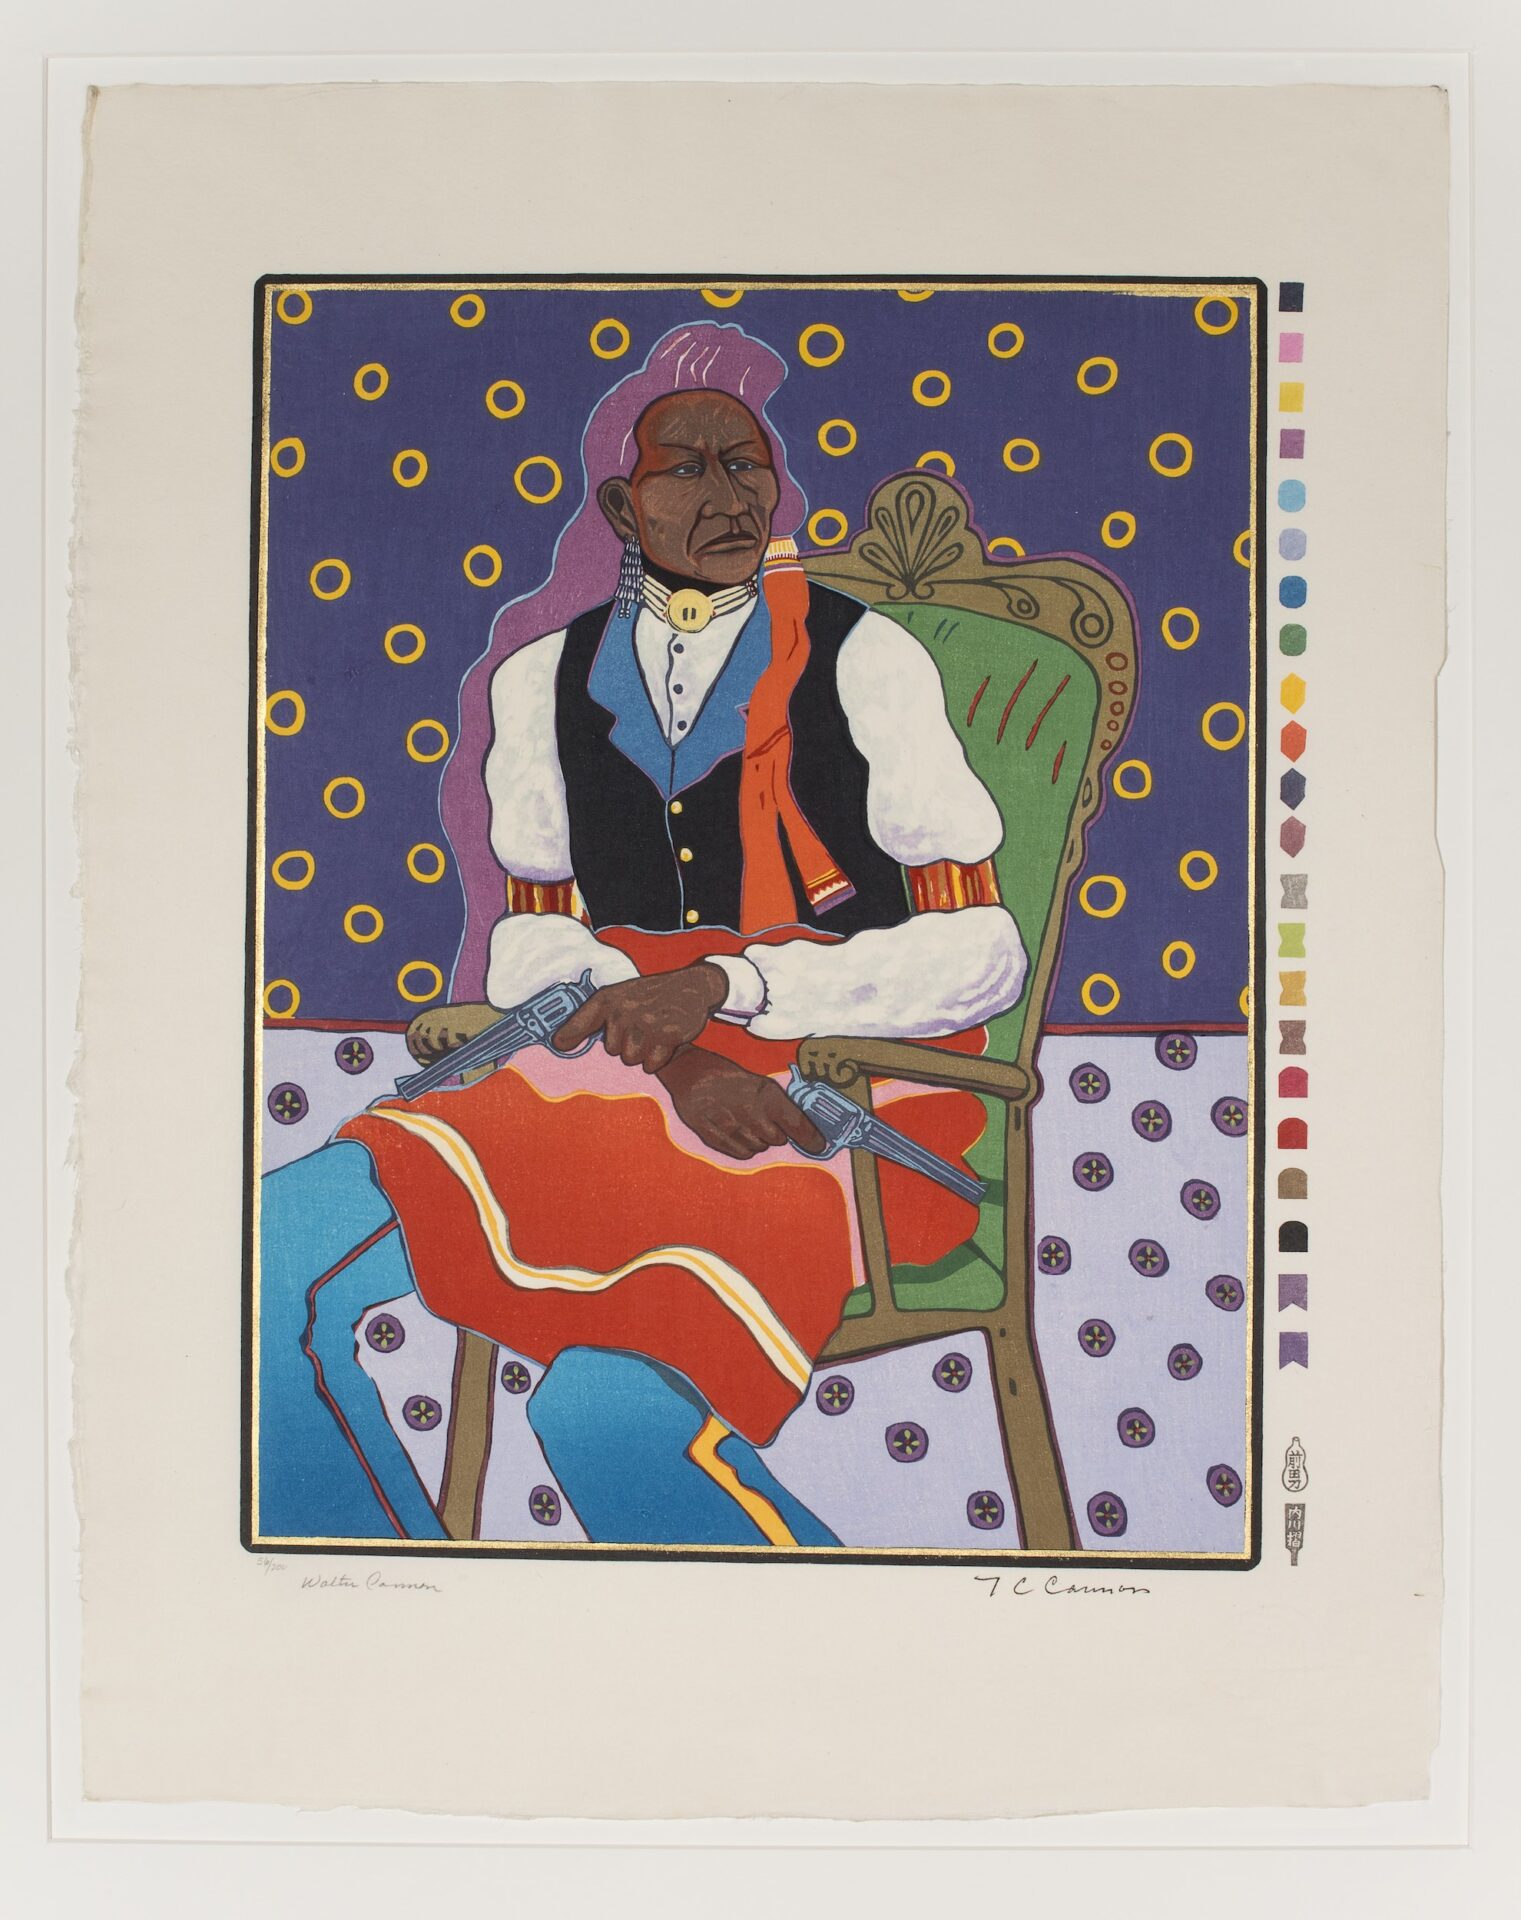 A painting of a Native man sitting in a chair.